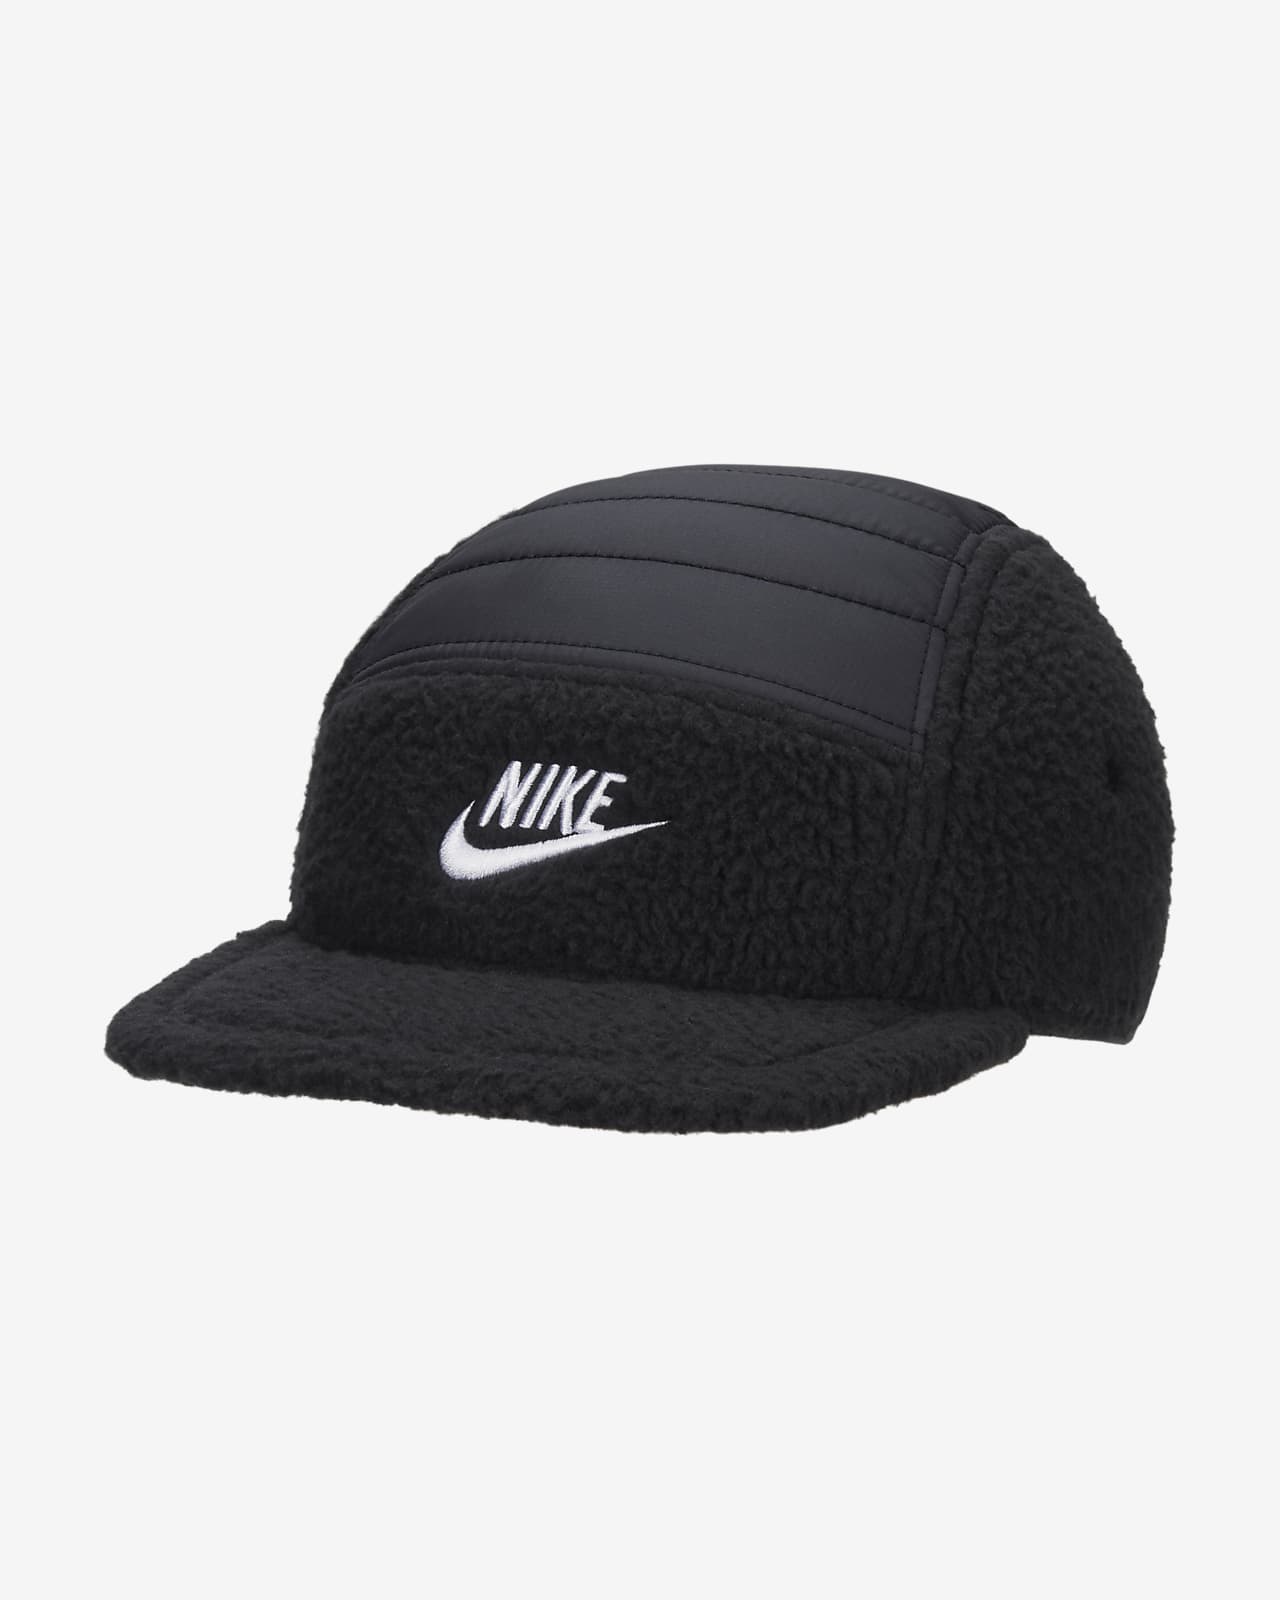 Nike Fly Cap Unstructured 5-panel Flat Bill Hat